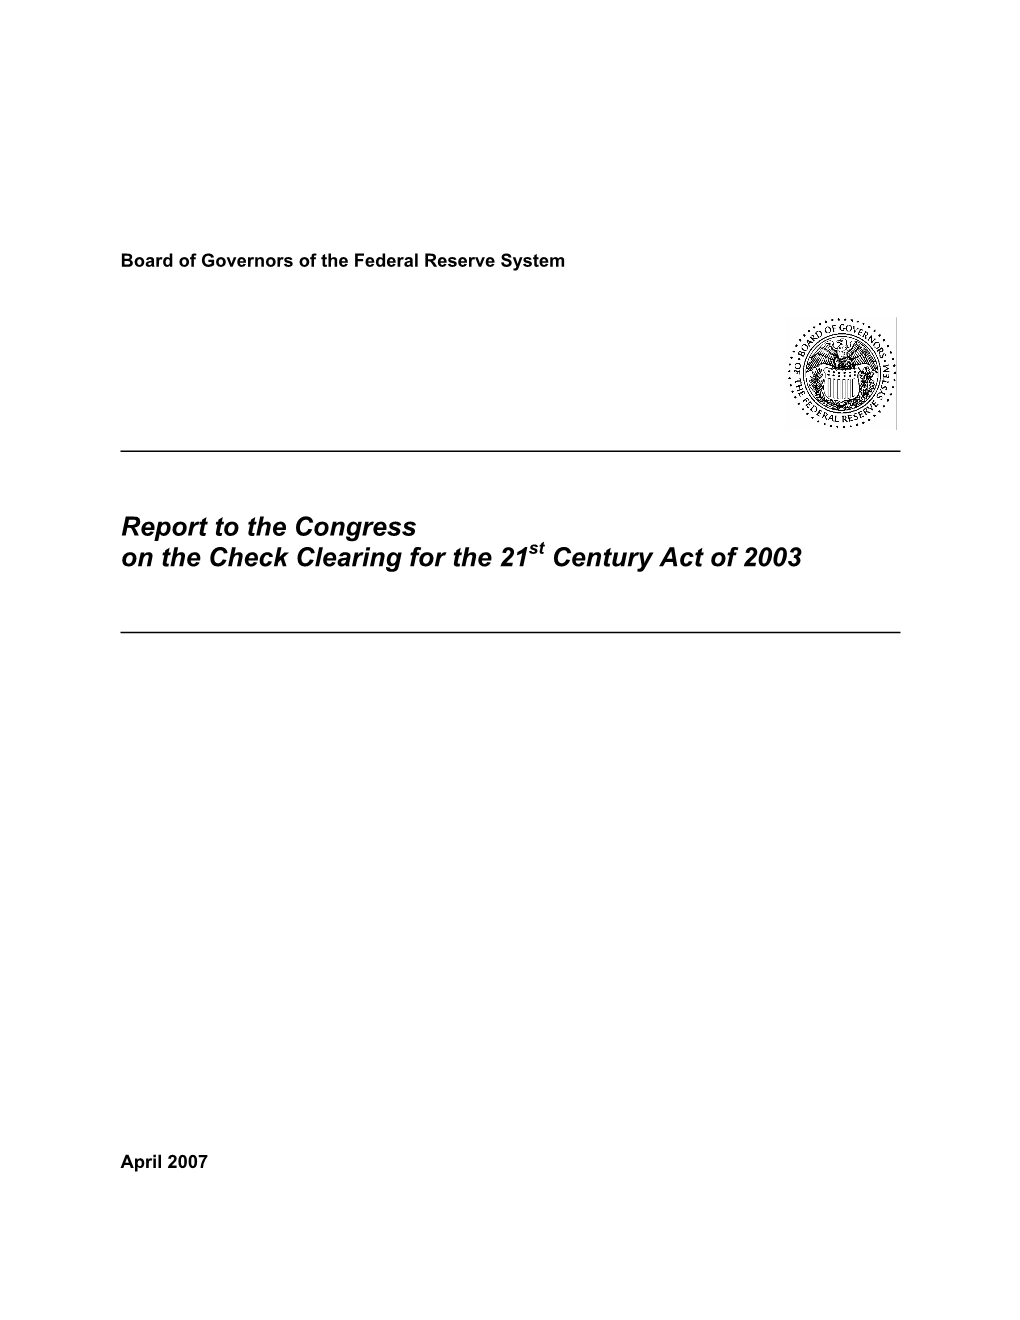 Report to the Congress on the Check Clearing for the 21St Century Act of 2003